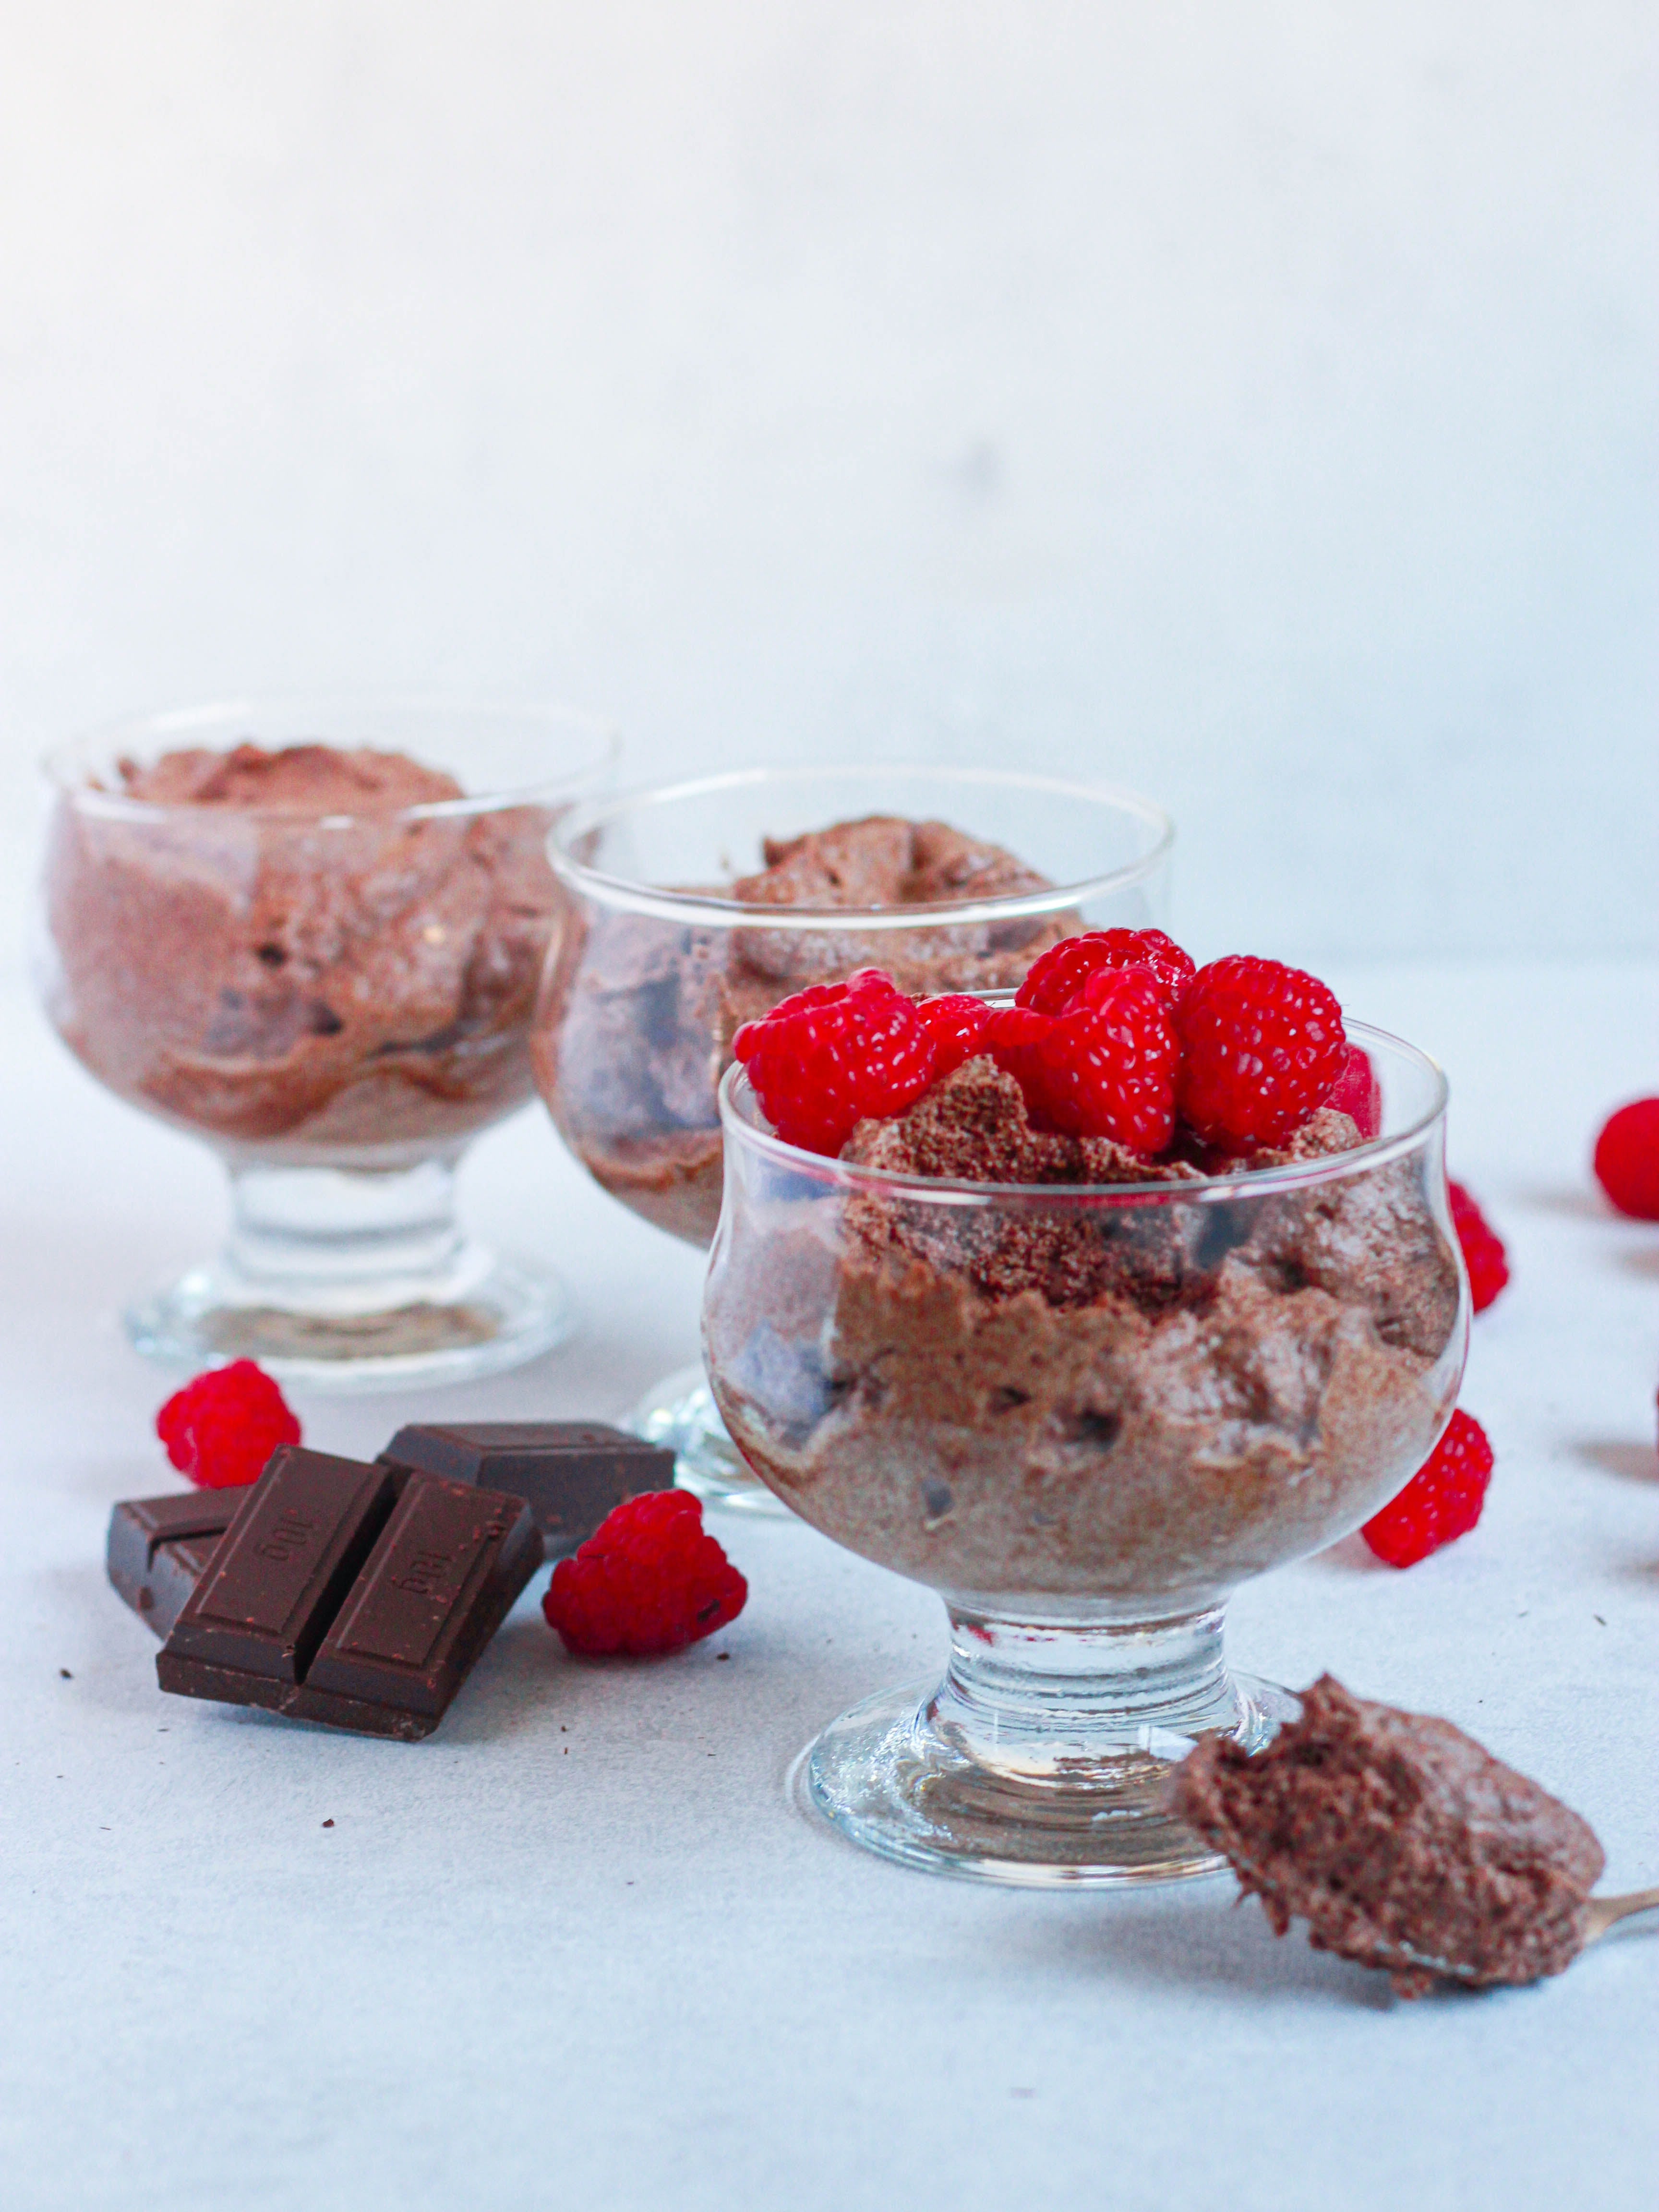 3 bowls of chocolate mousse, topped with raspberries and chocolate chunks